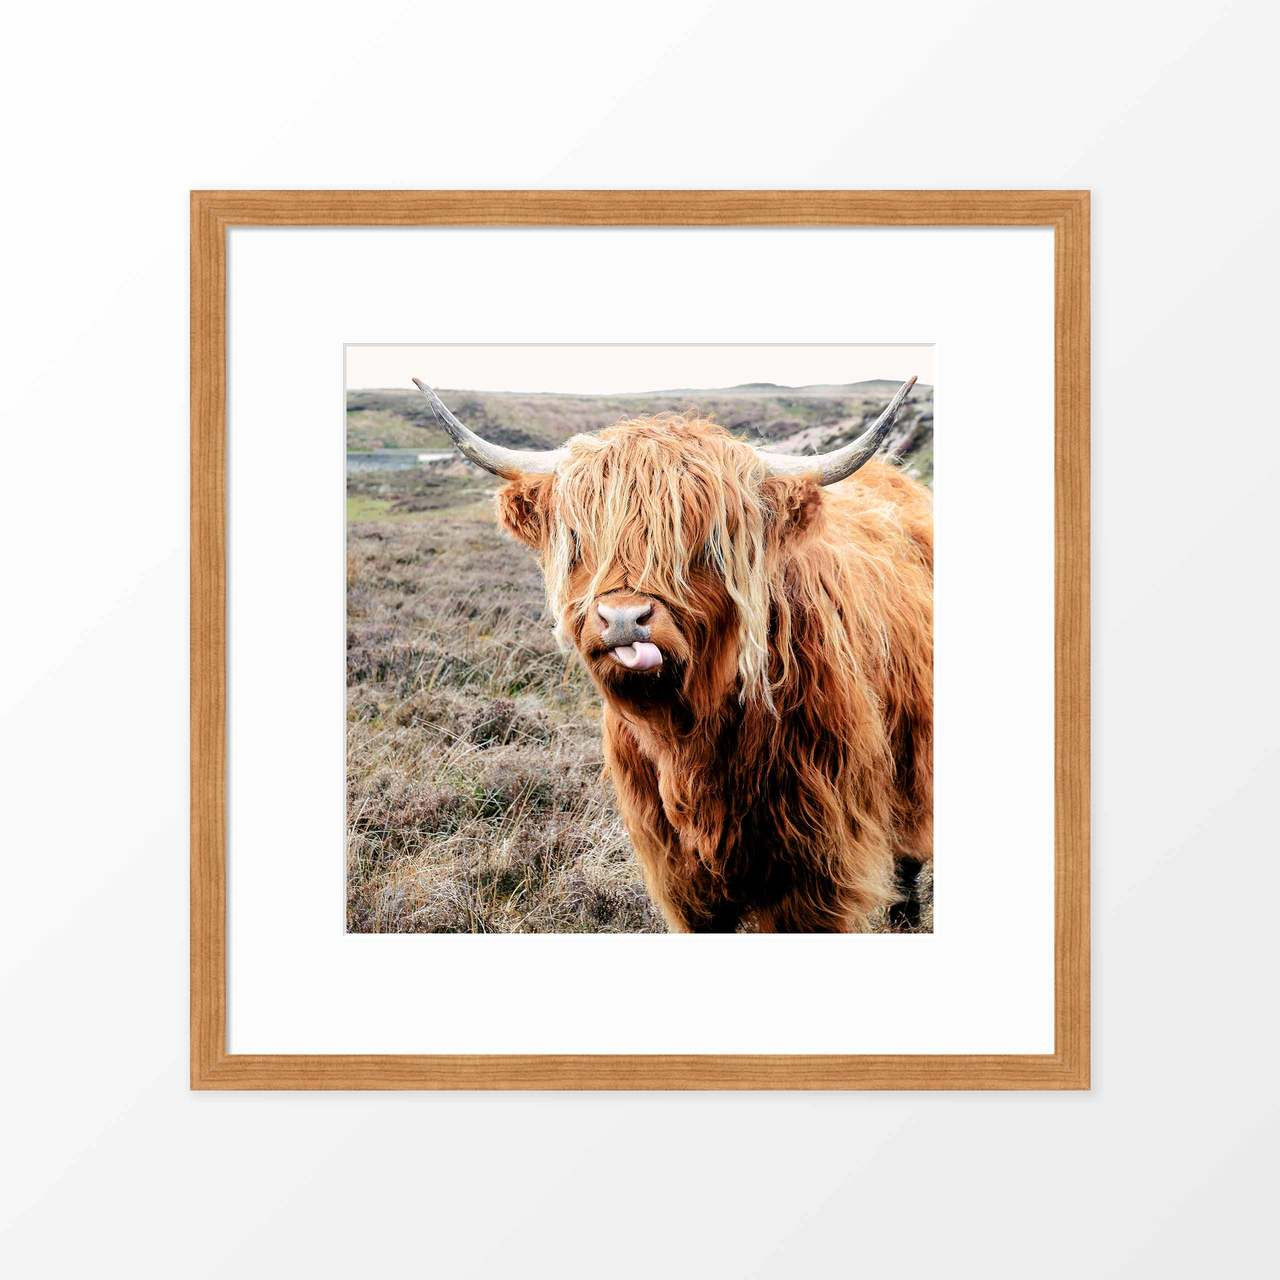 'Highland Cow' Photography Poster from The Printed Home